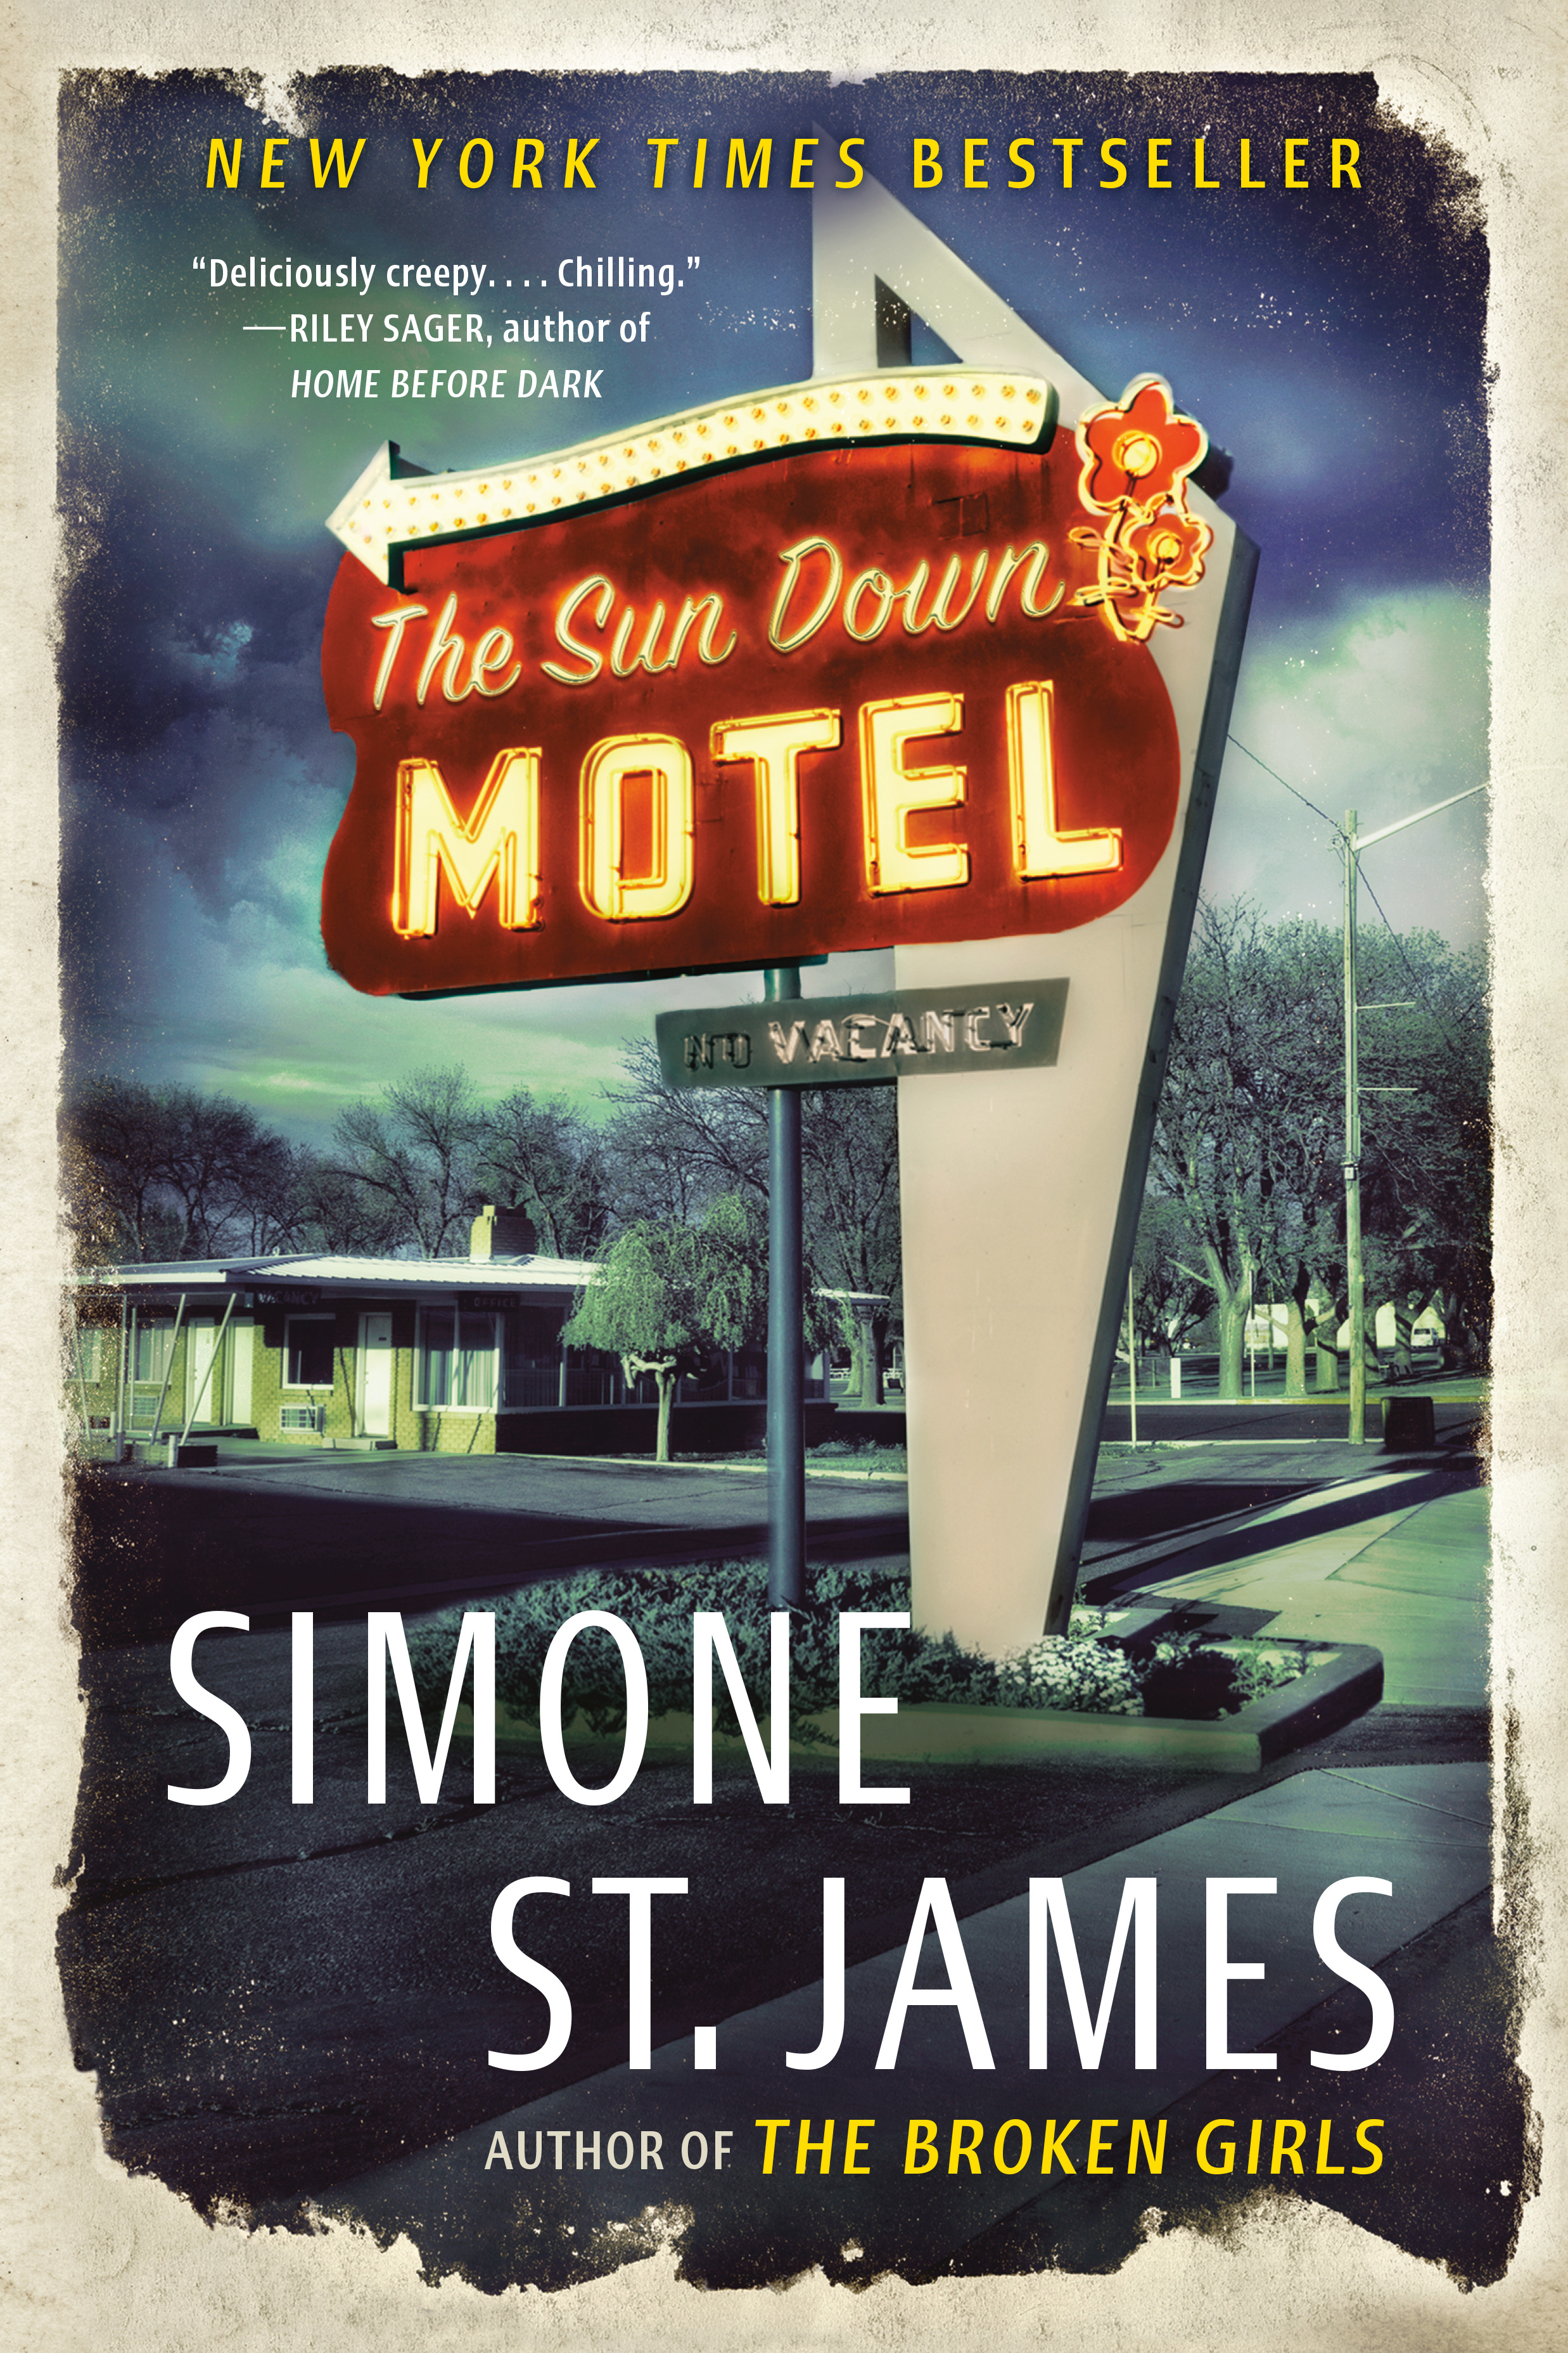 ISBN 9780440000181 product image for The Sun Down Motel | upcitemdb.com